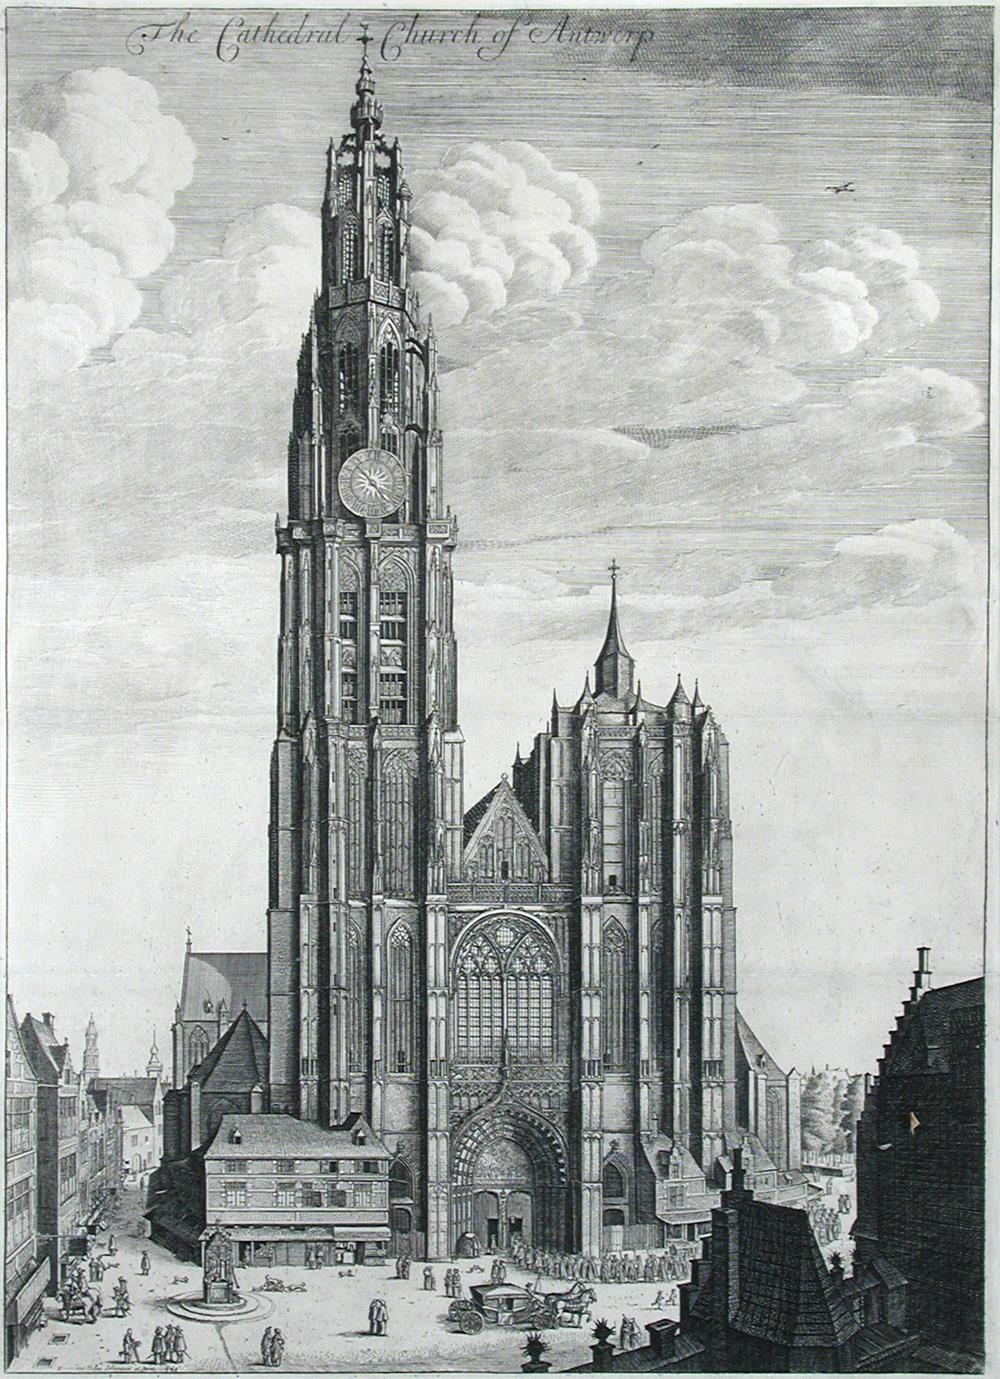 Wenceslas Hollar (1607-1677) Antwerp Cathedral, etching, 1649 or later, state with text above the